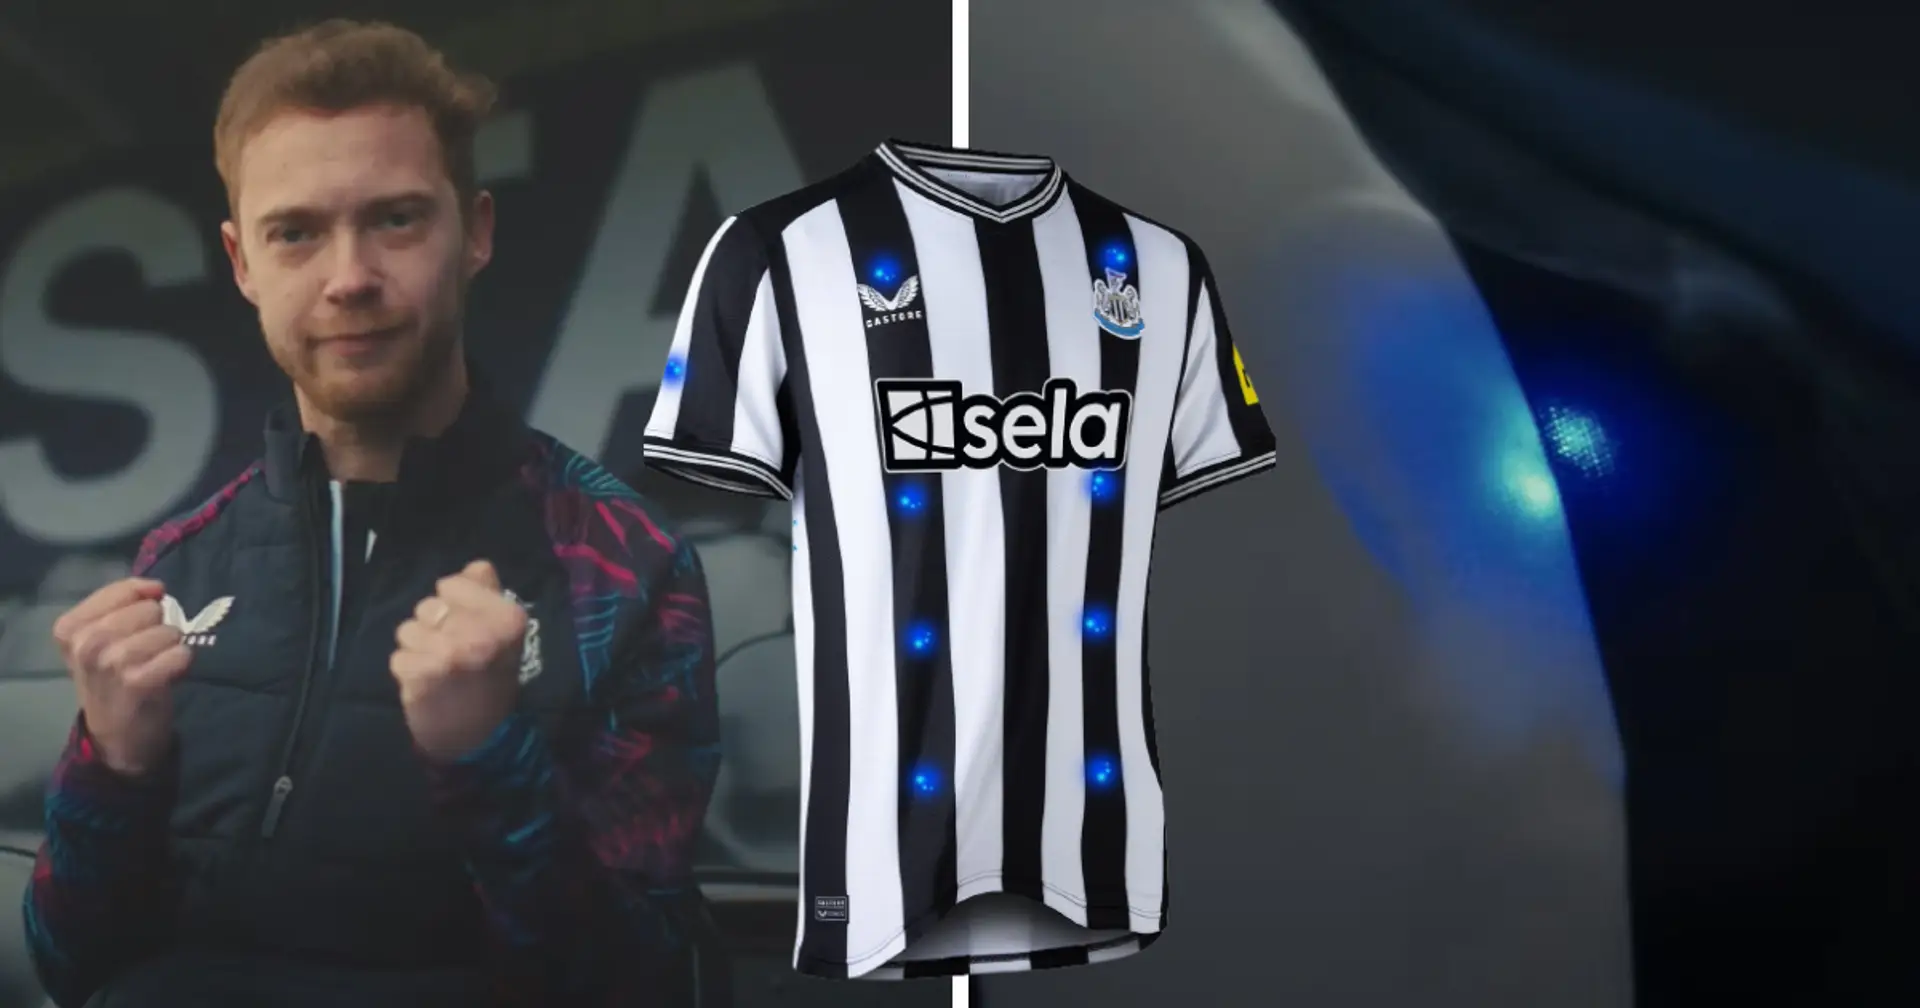 Newcastle creates unique shirt for deaf people that allows to 'feel' the noise of St James’ Park